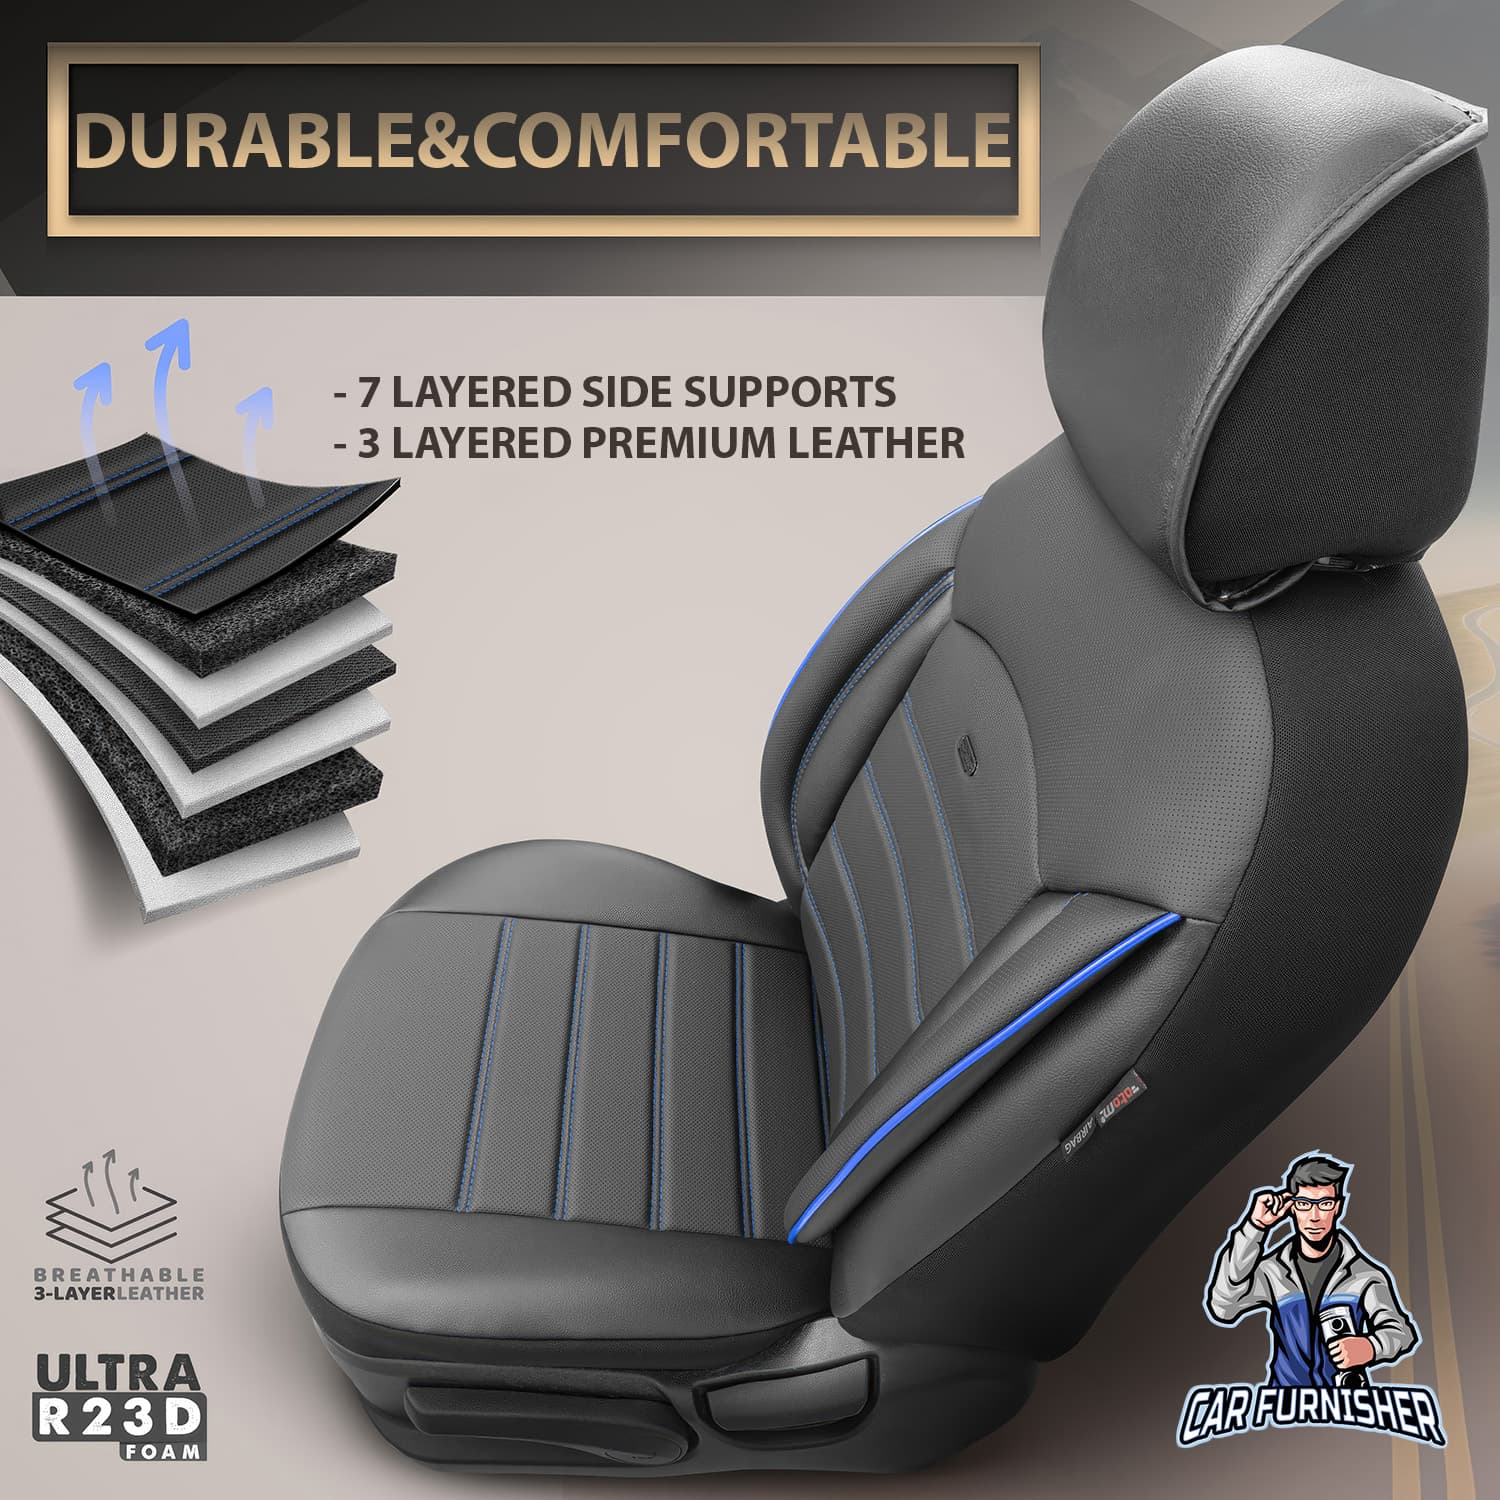 Mercedes 190 Seat Covers Inspire Design Blue 5 Seats + Headrests (Full Set) Full Leather